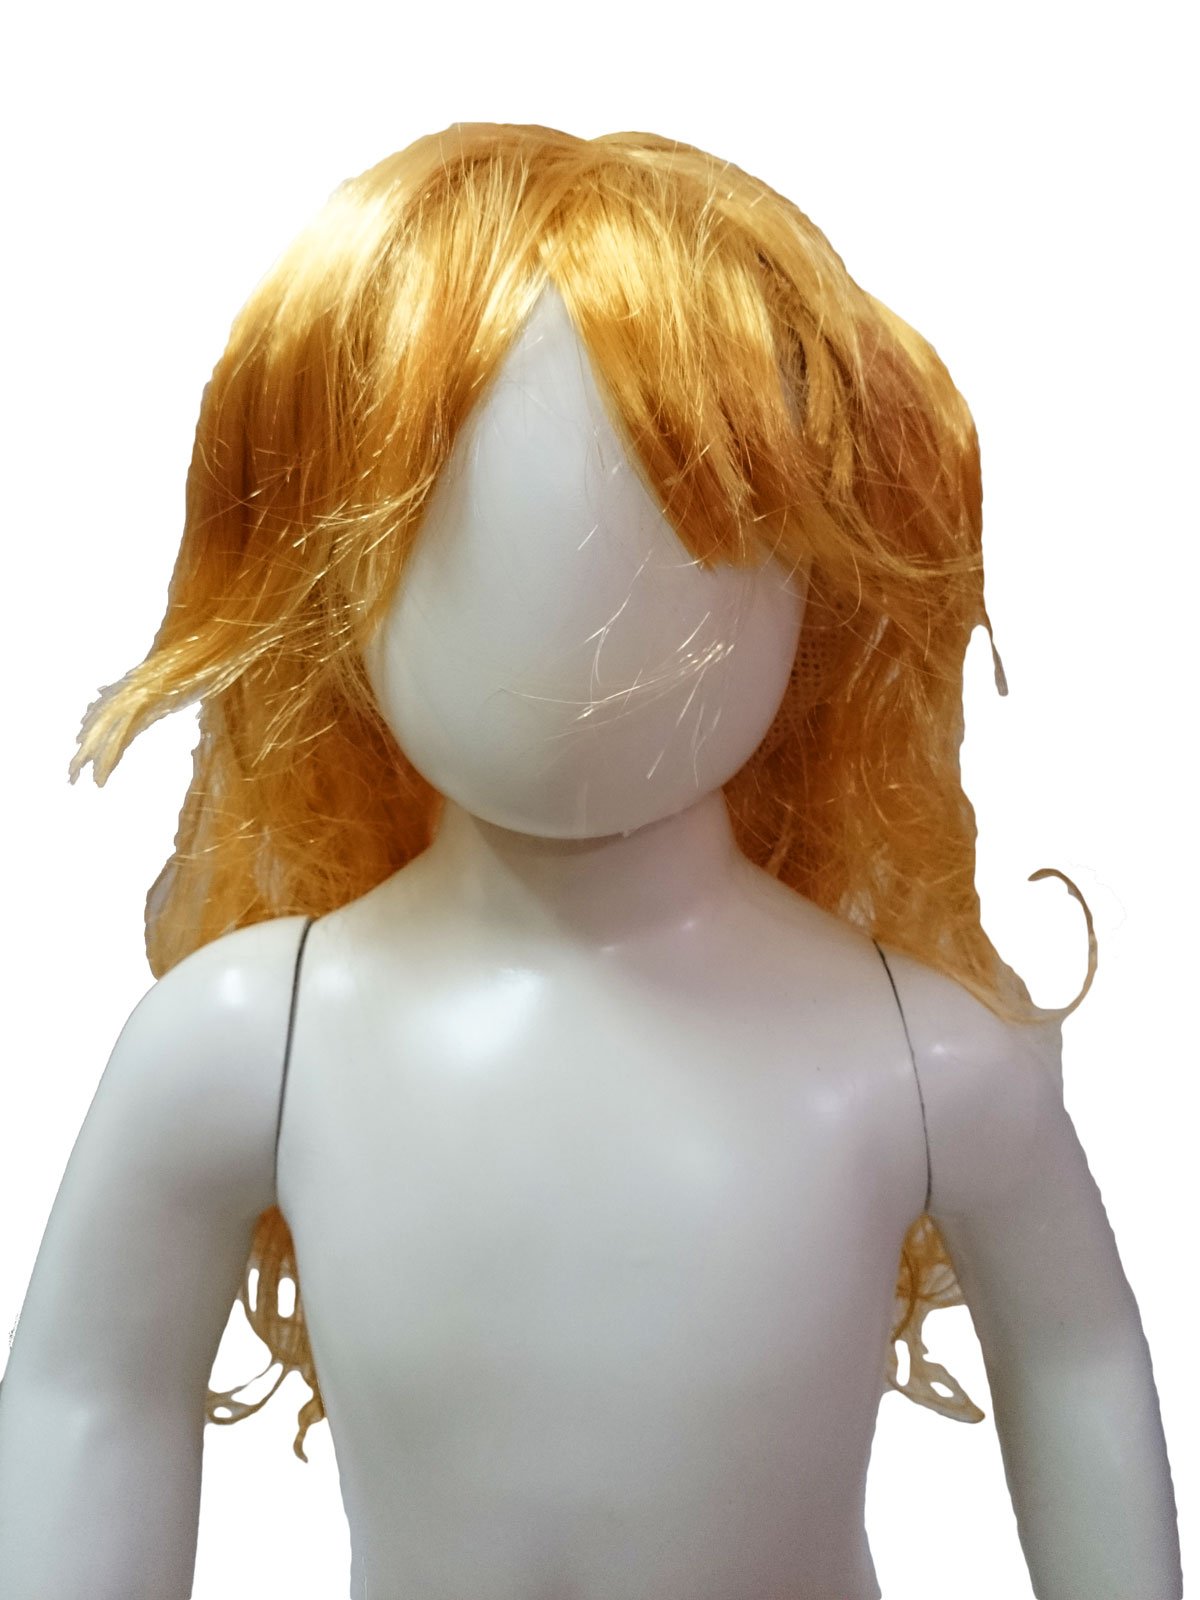 Buy Golden Blonde Hair Wig GirlFemale Costume Accessory Online India